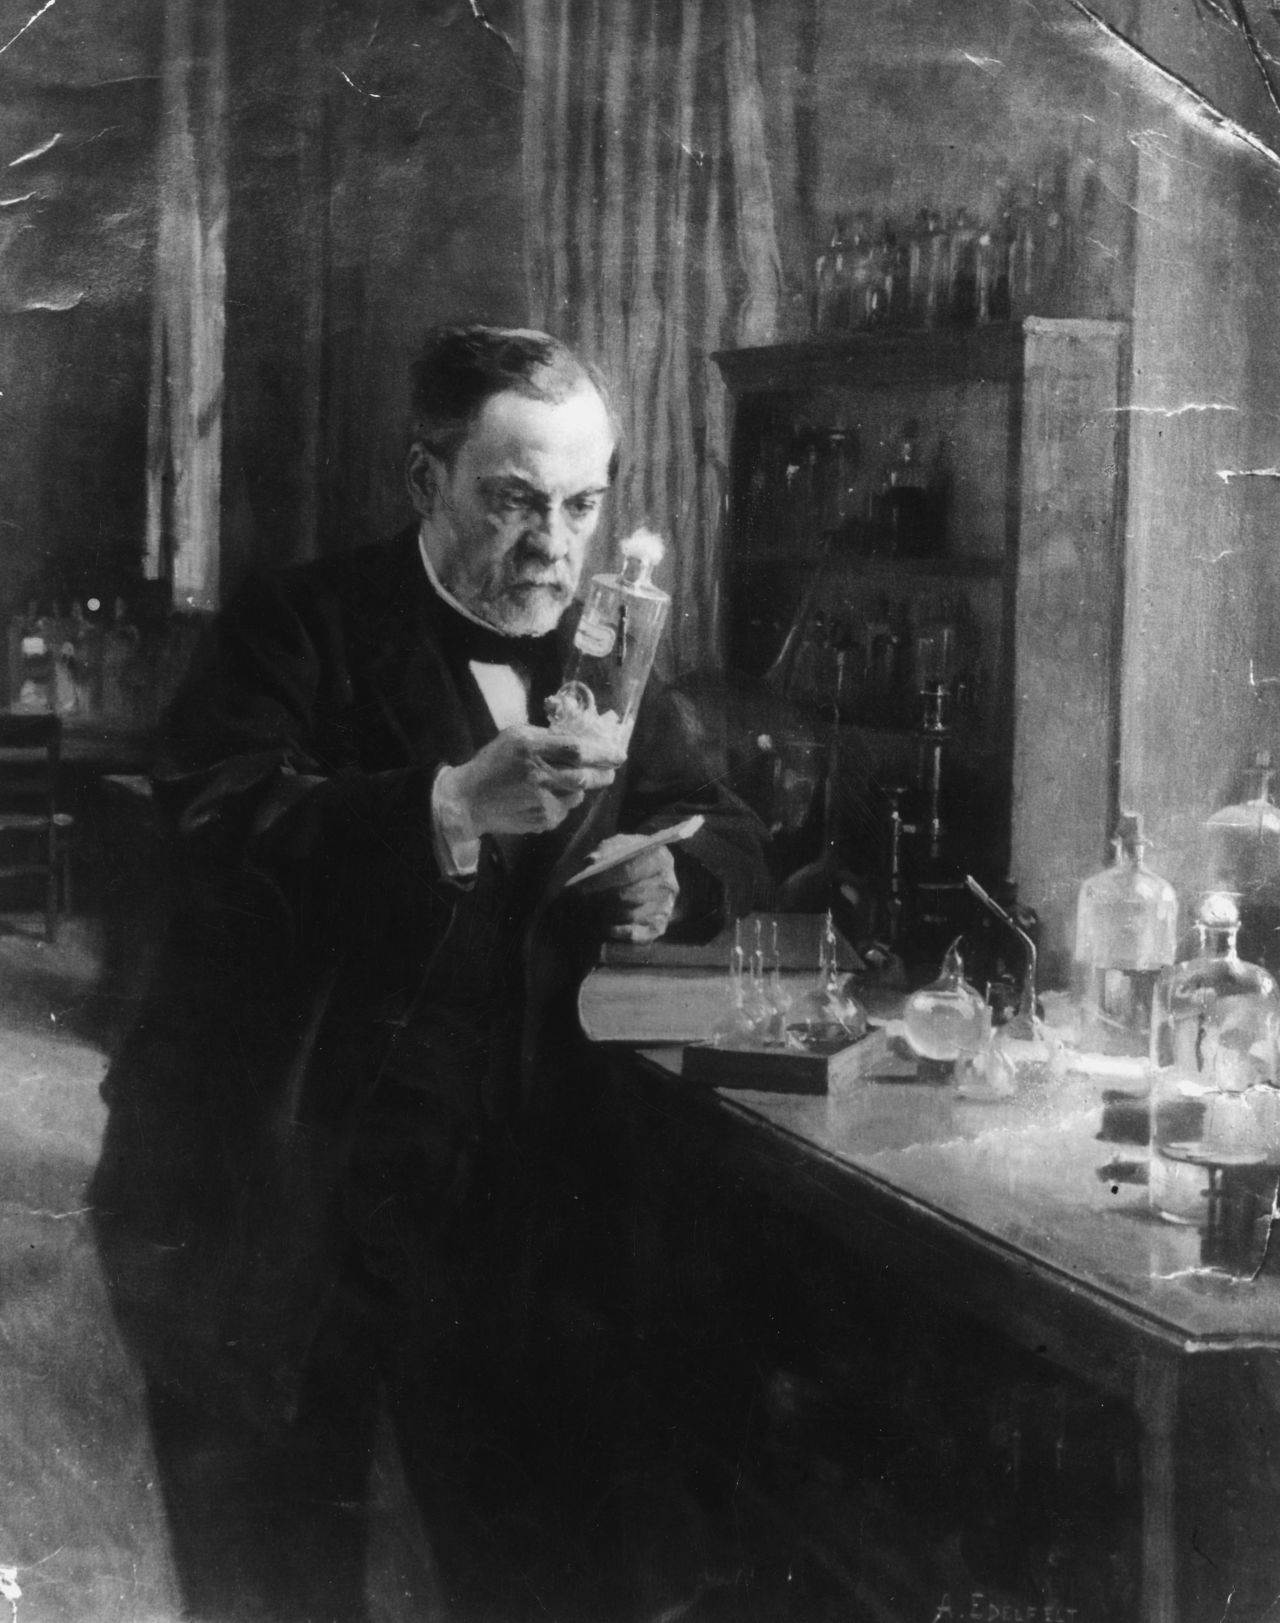 You probably know <a href="http://www.britannica.com/EBchecked/topic/445964/Louis-Pasteur" target="_blank" target="_blank">Louis Pasteur</a> as the man who invented pasteurization. But Pasteur also developed the first vaccines for rabies and anthrax. The French microbiologist grew rabies in rabbits first to weaken the virus. Then in 1885, he injected the vaccine into a 9-year-old boy who had been attacked by a dog; it was a success and Pasteur became famous. 